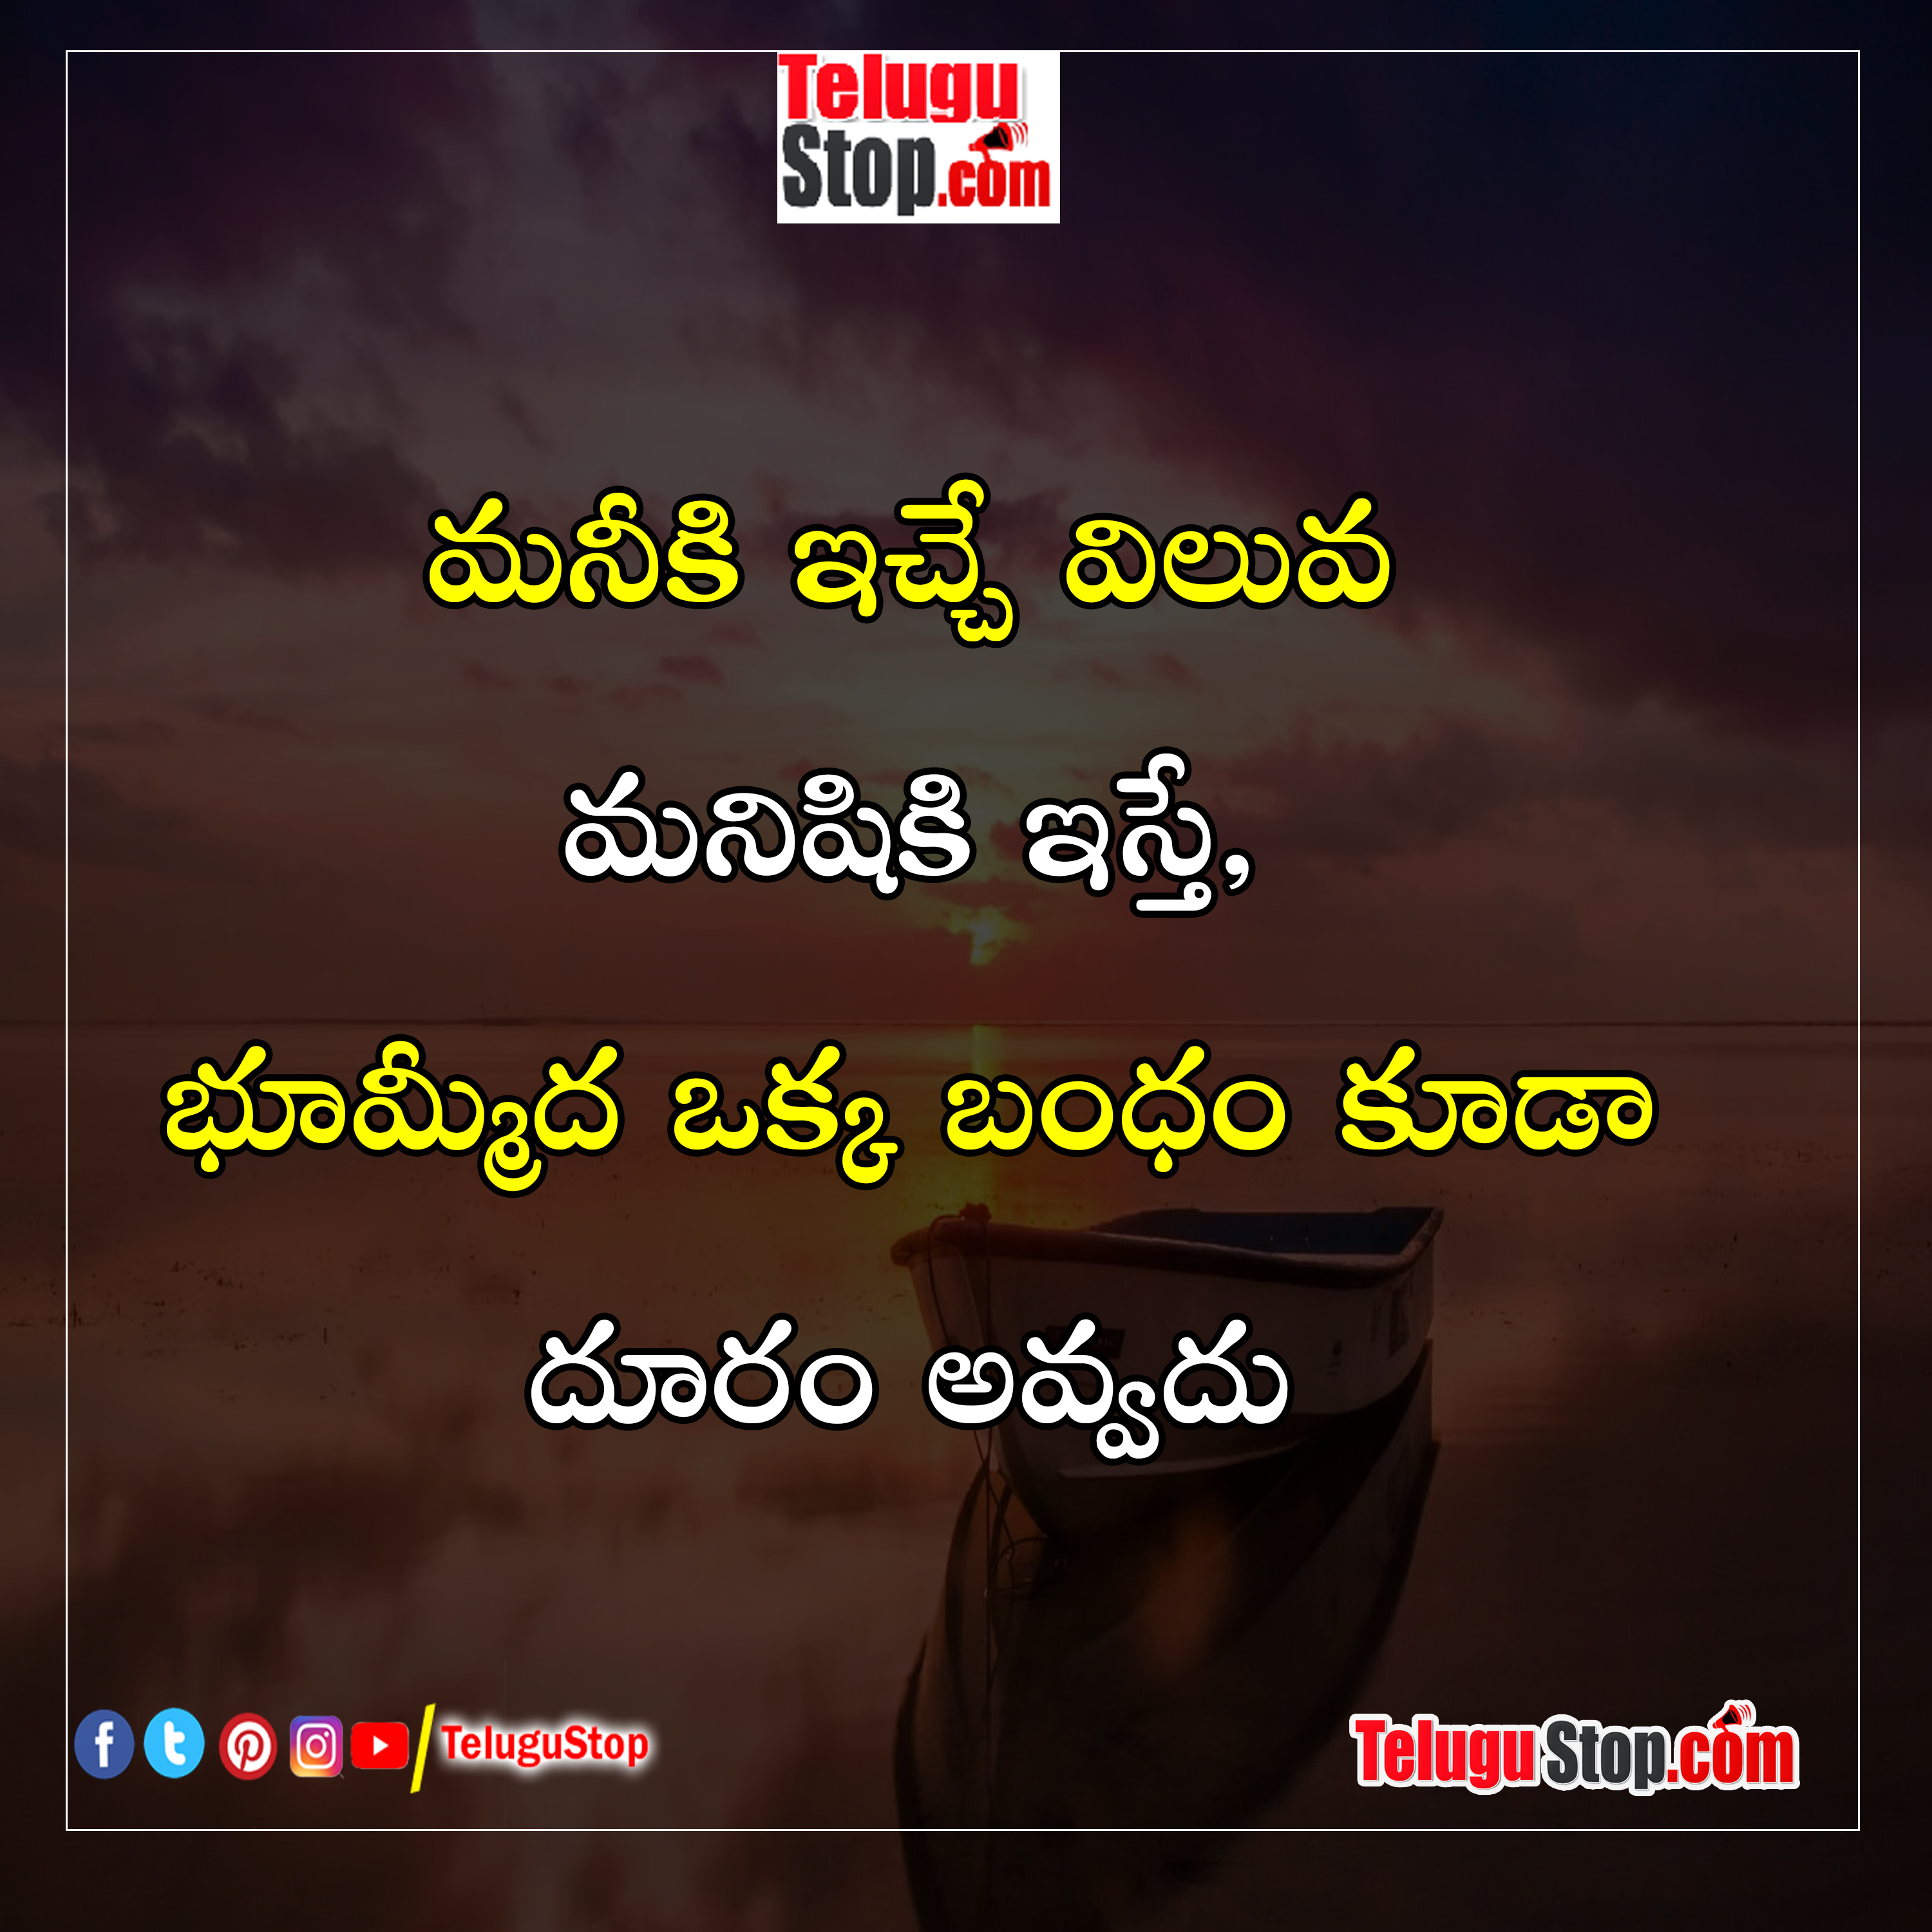 Mani and human quotes in telugu images free download inspirational quotes